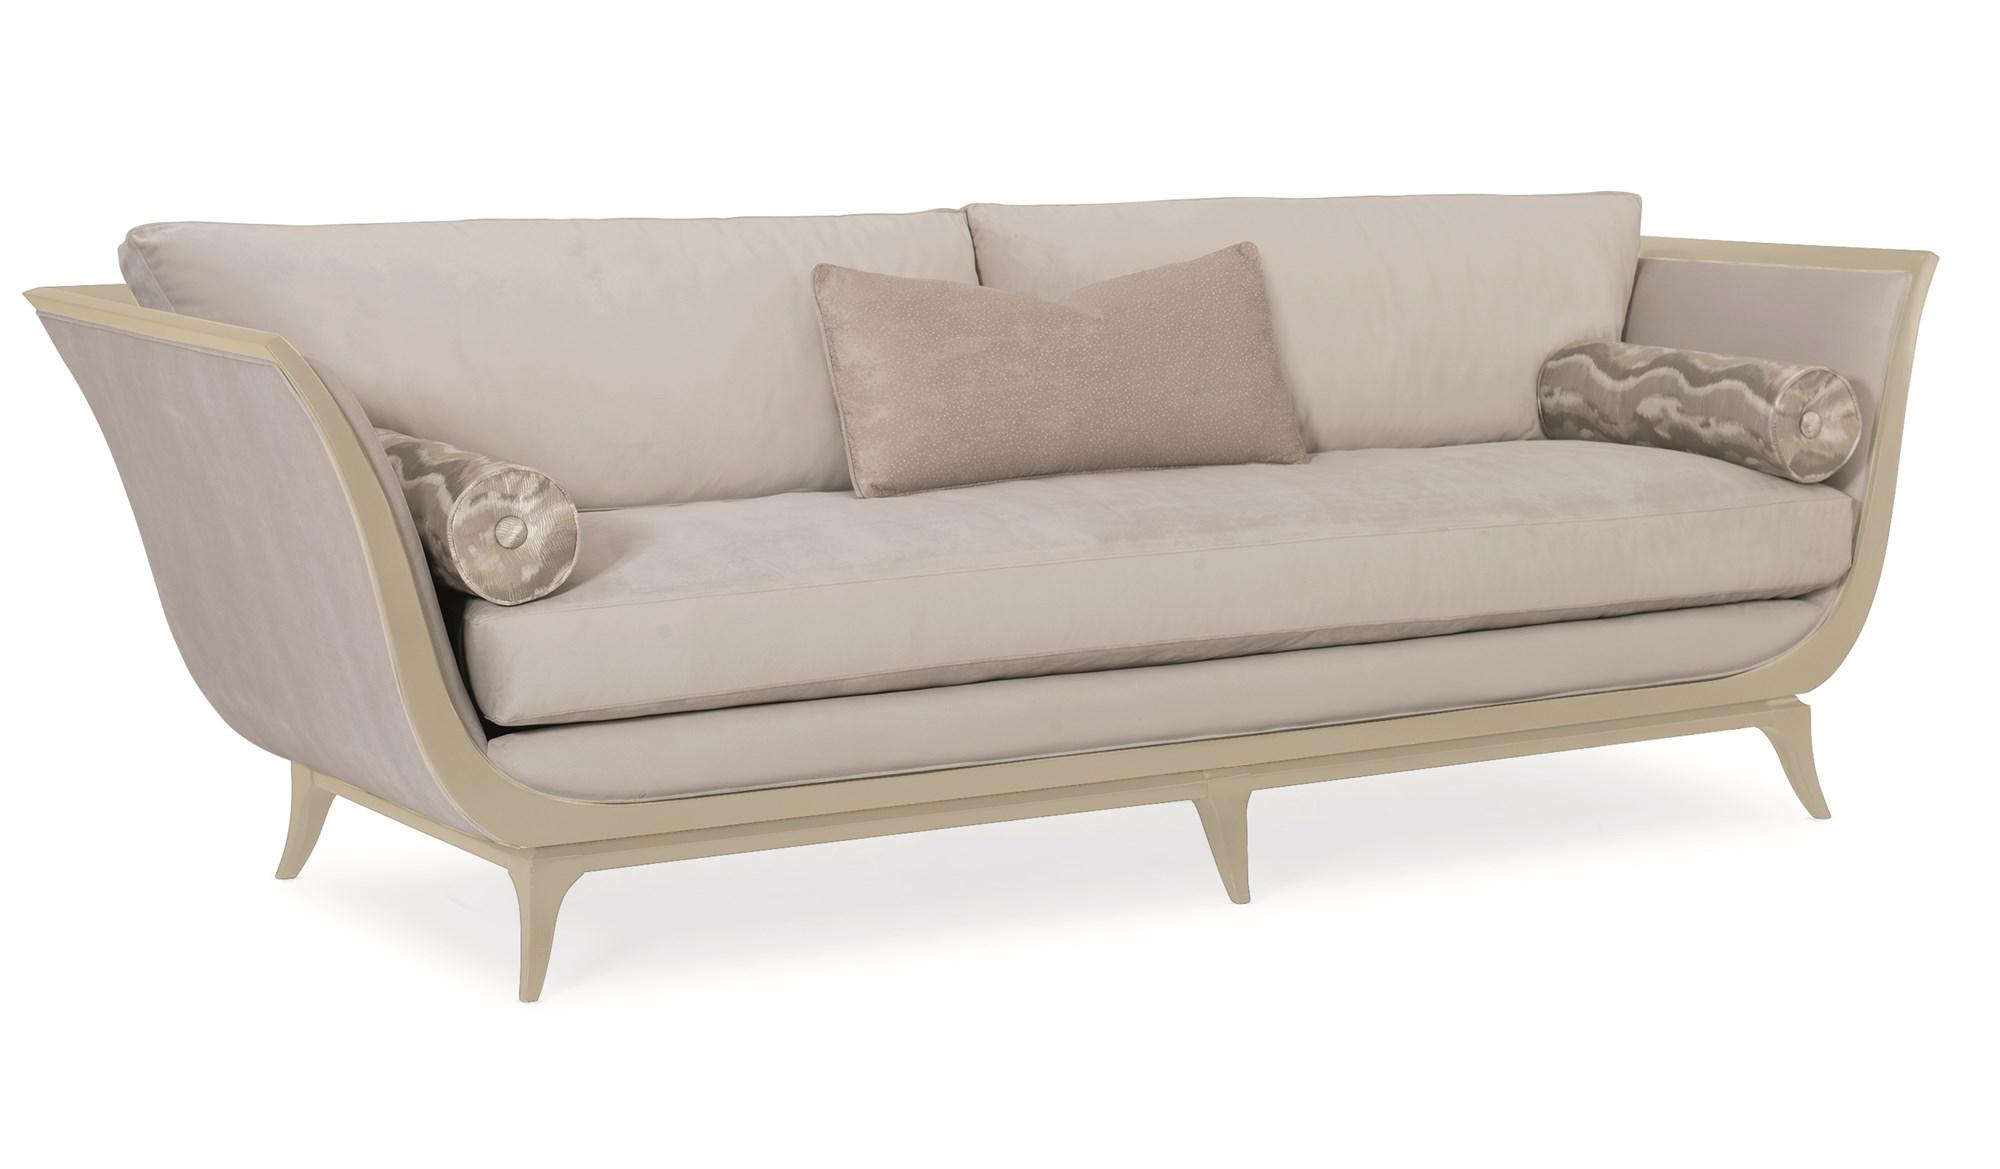 Contemporary Sofa LOVE A-FLAIR UPH-418-112-B in Taupe, Champagne Fabric